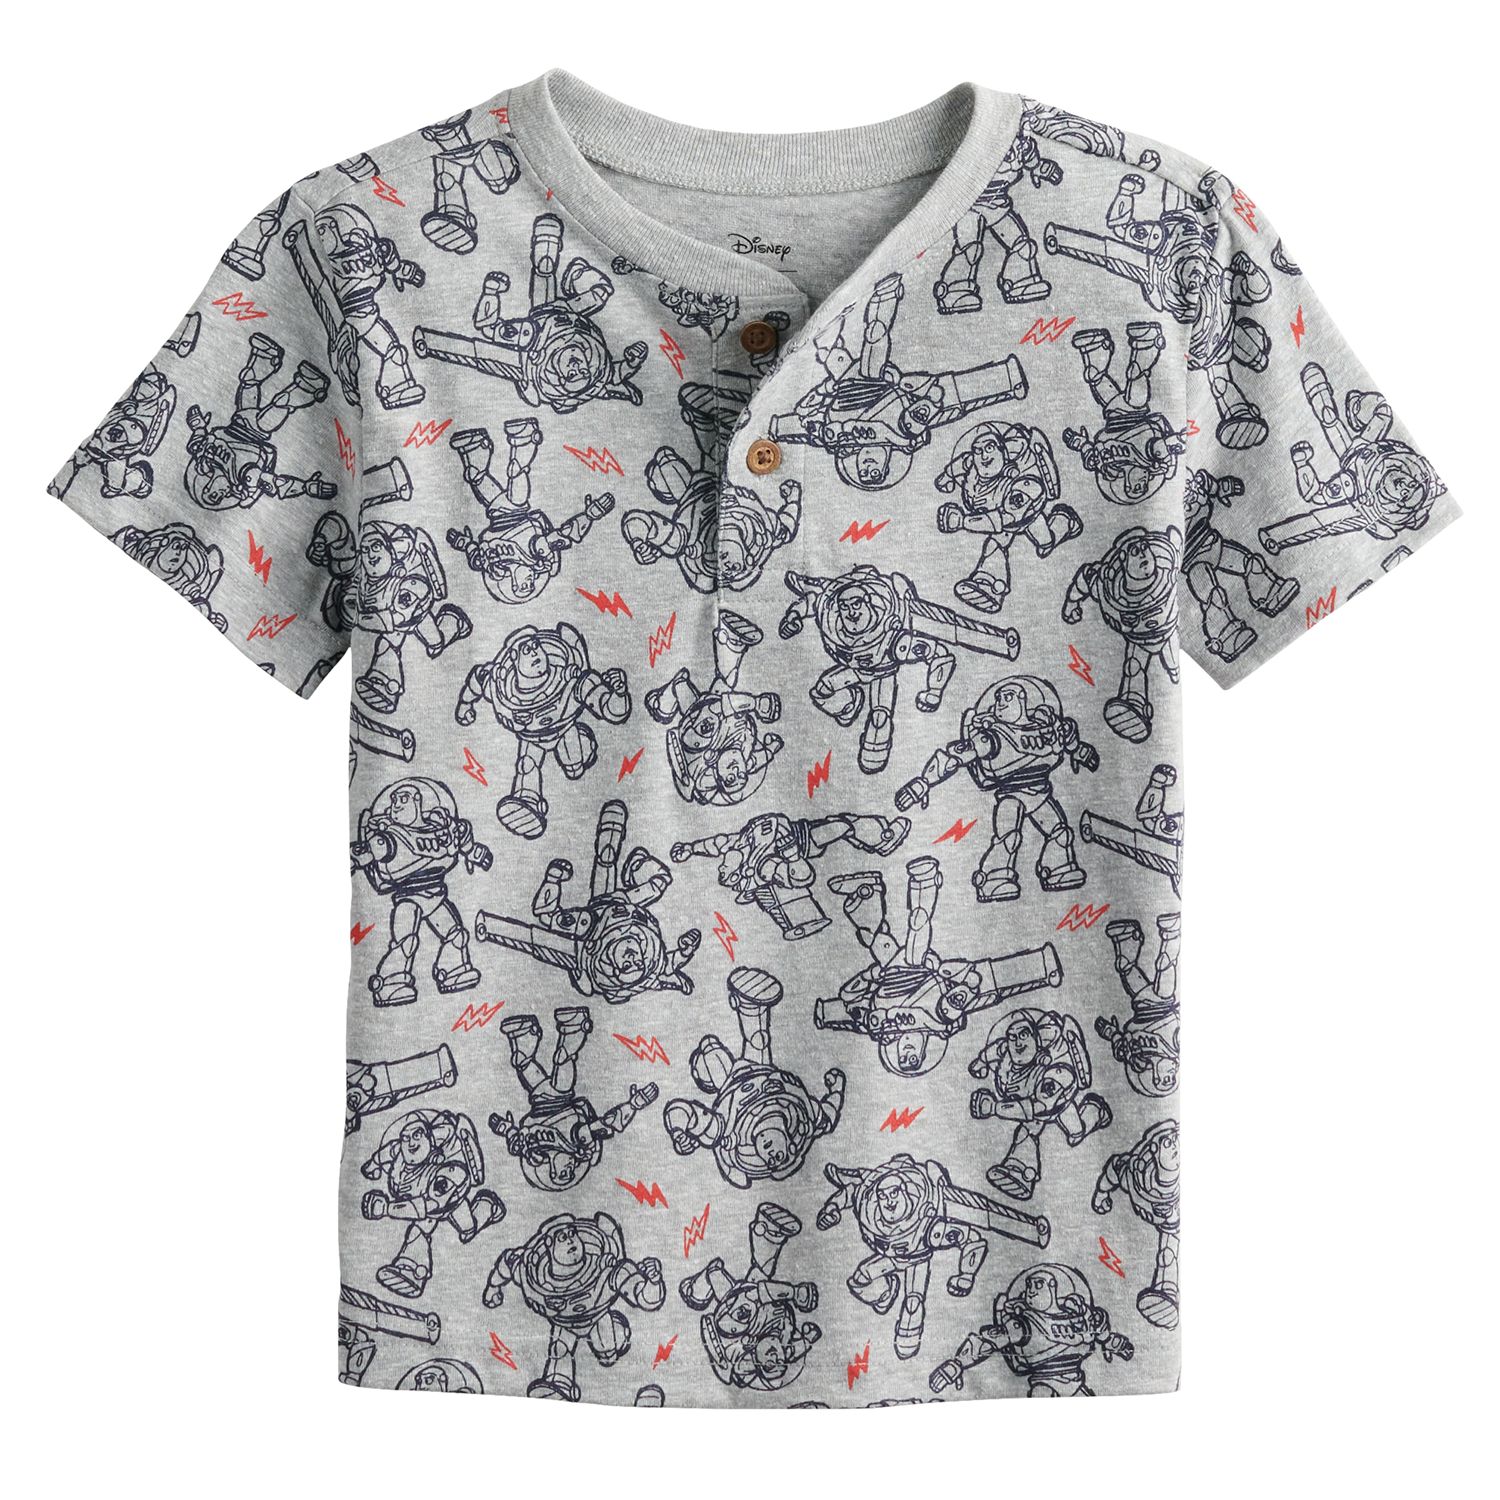 Image for Disney/Jumping Beans Disney / Pixar Toy Story Toddler Boy Buzz Lightyear Henley Top by Jumping Beans® at Kohl's.